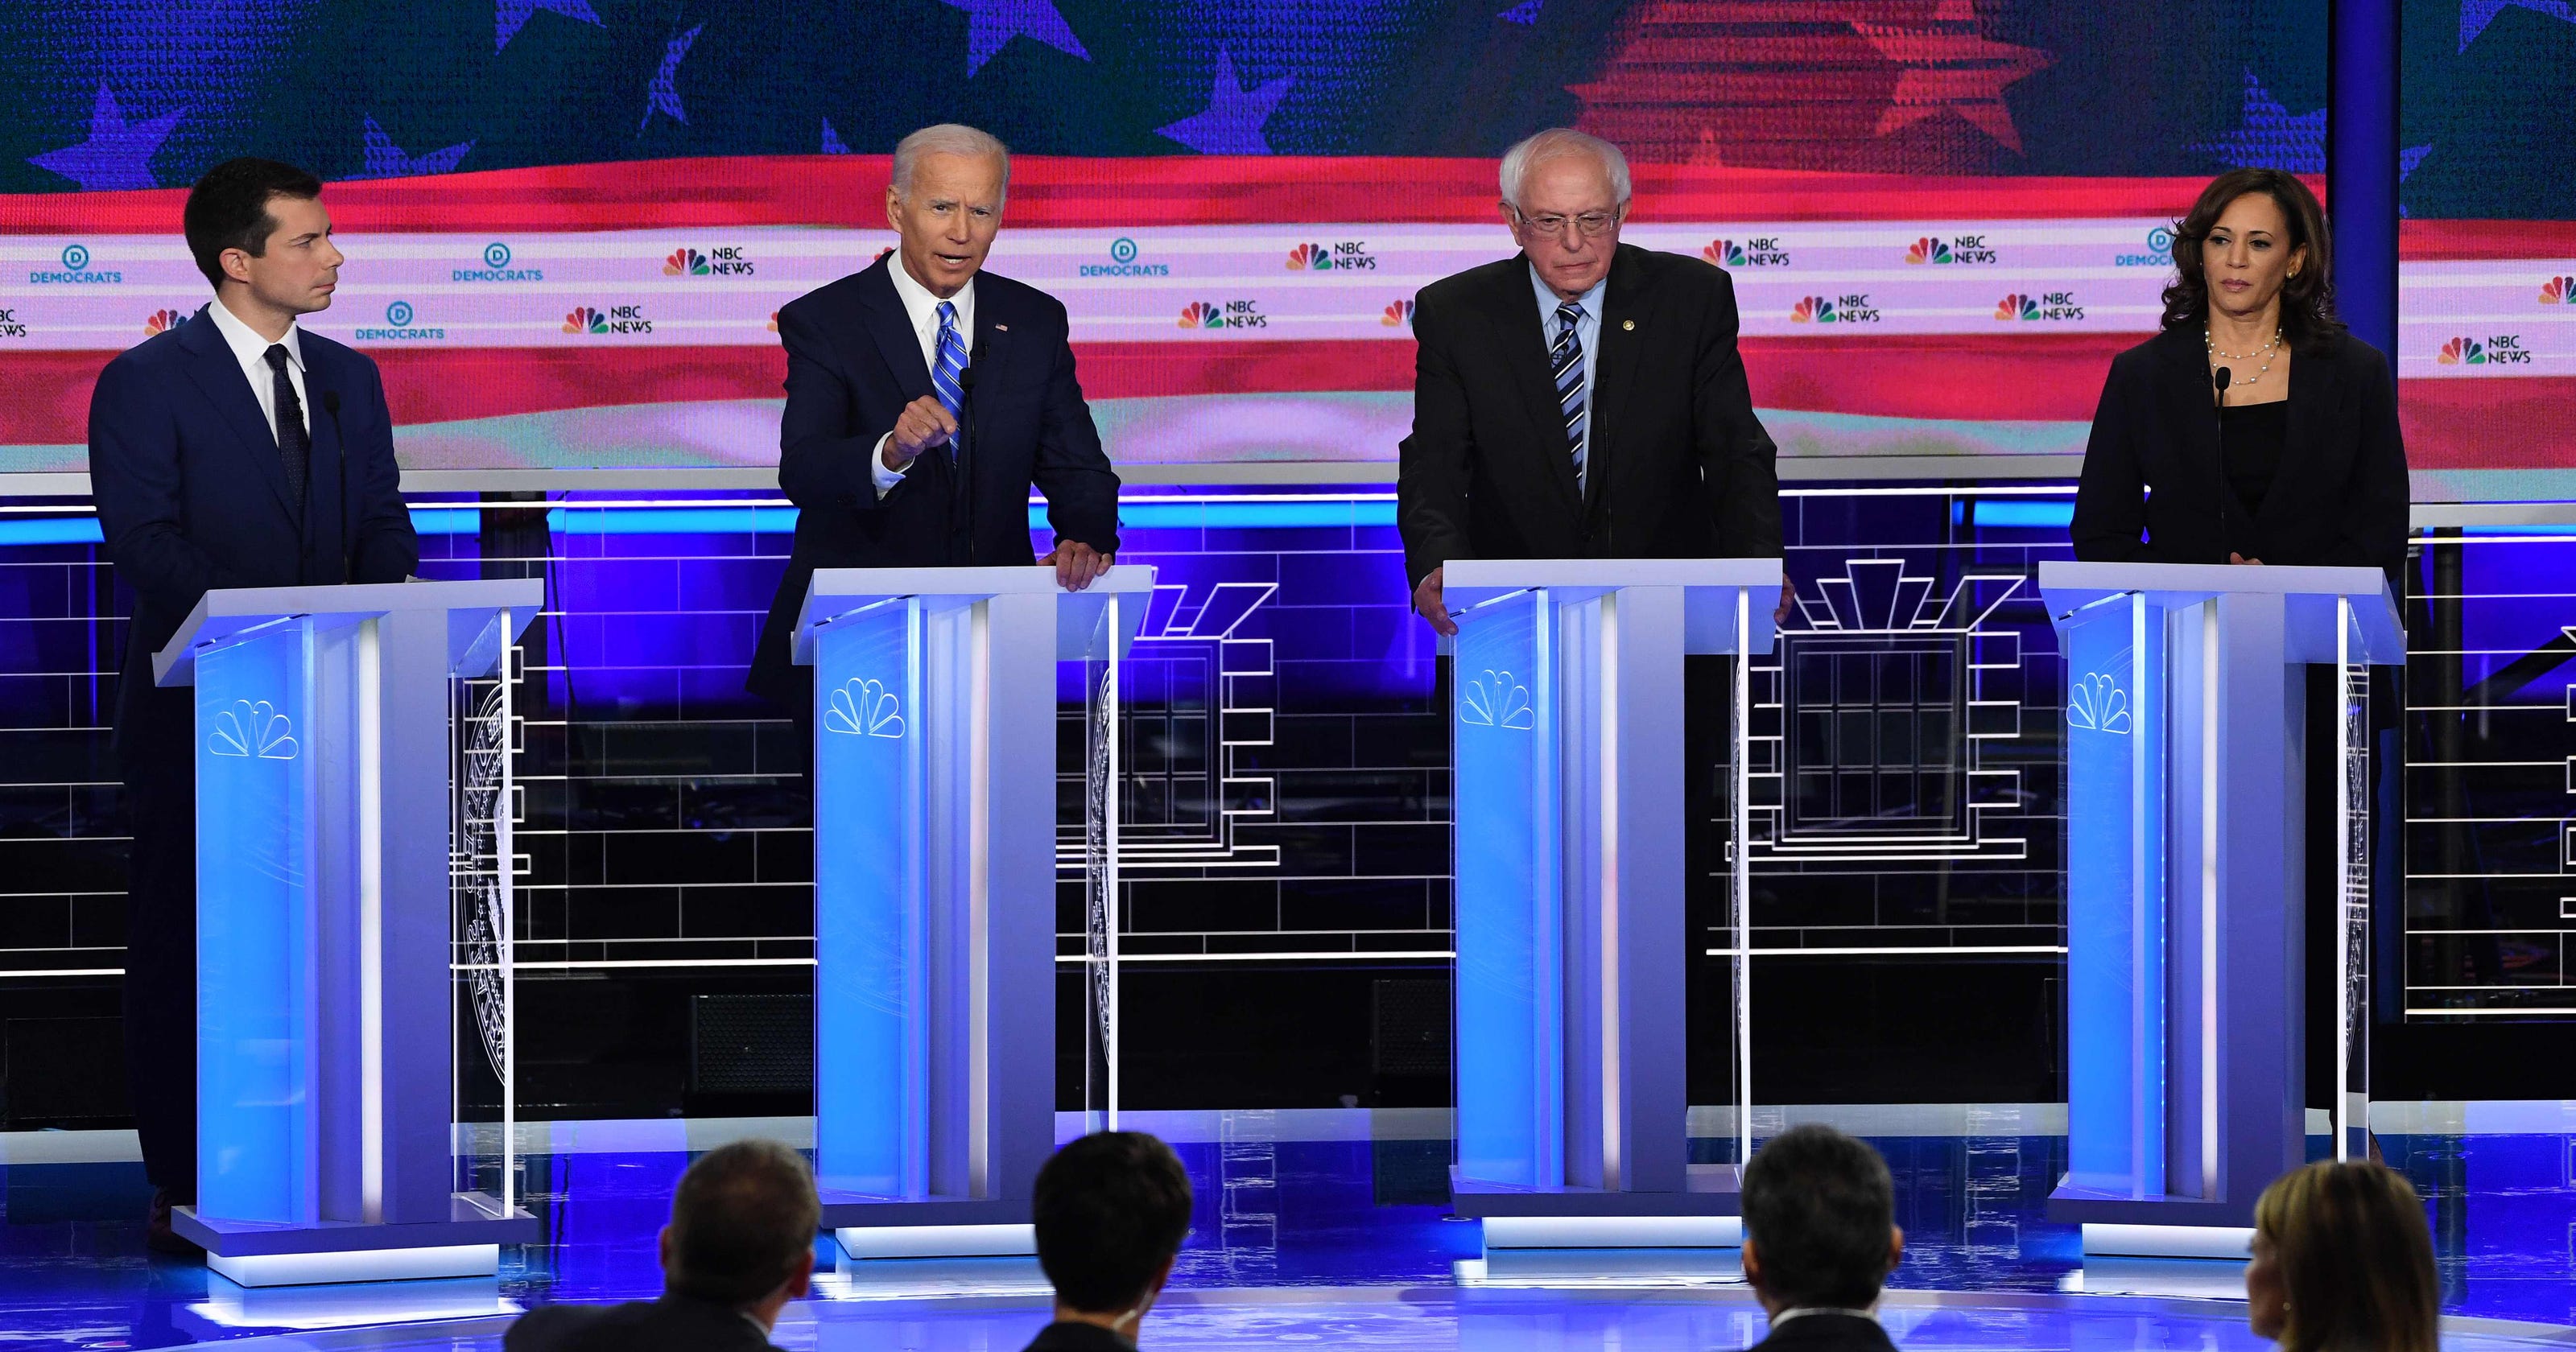 democratic-debates-grading-the-2020-candidates-vying-to-take-on-trump